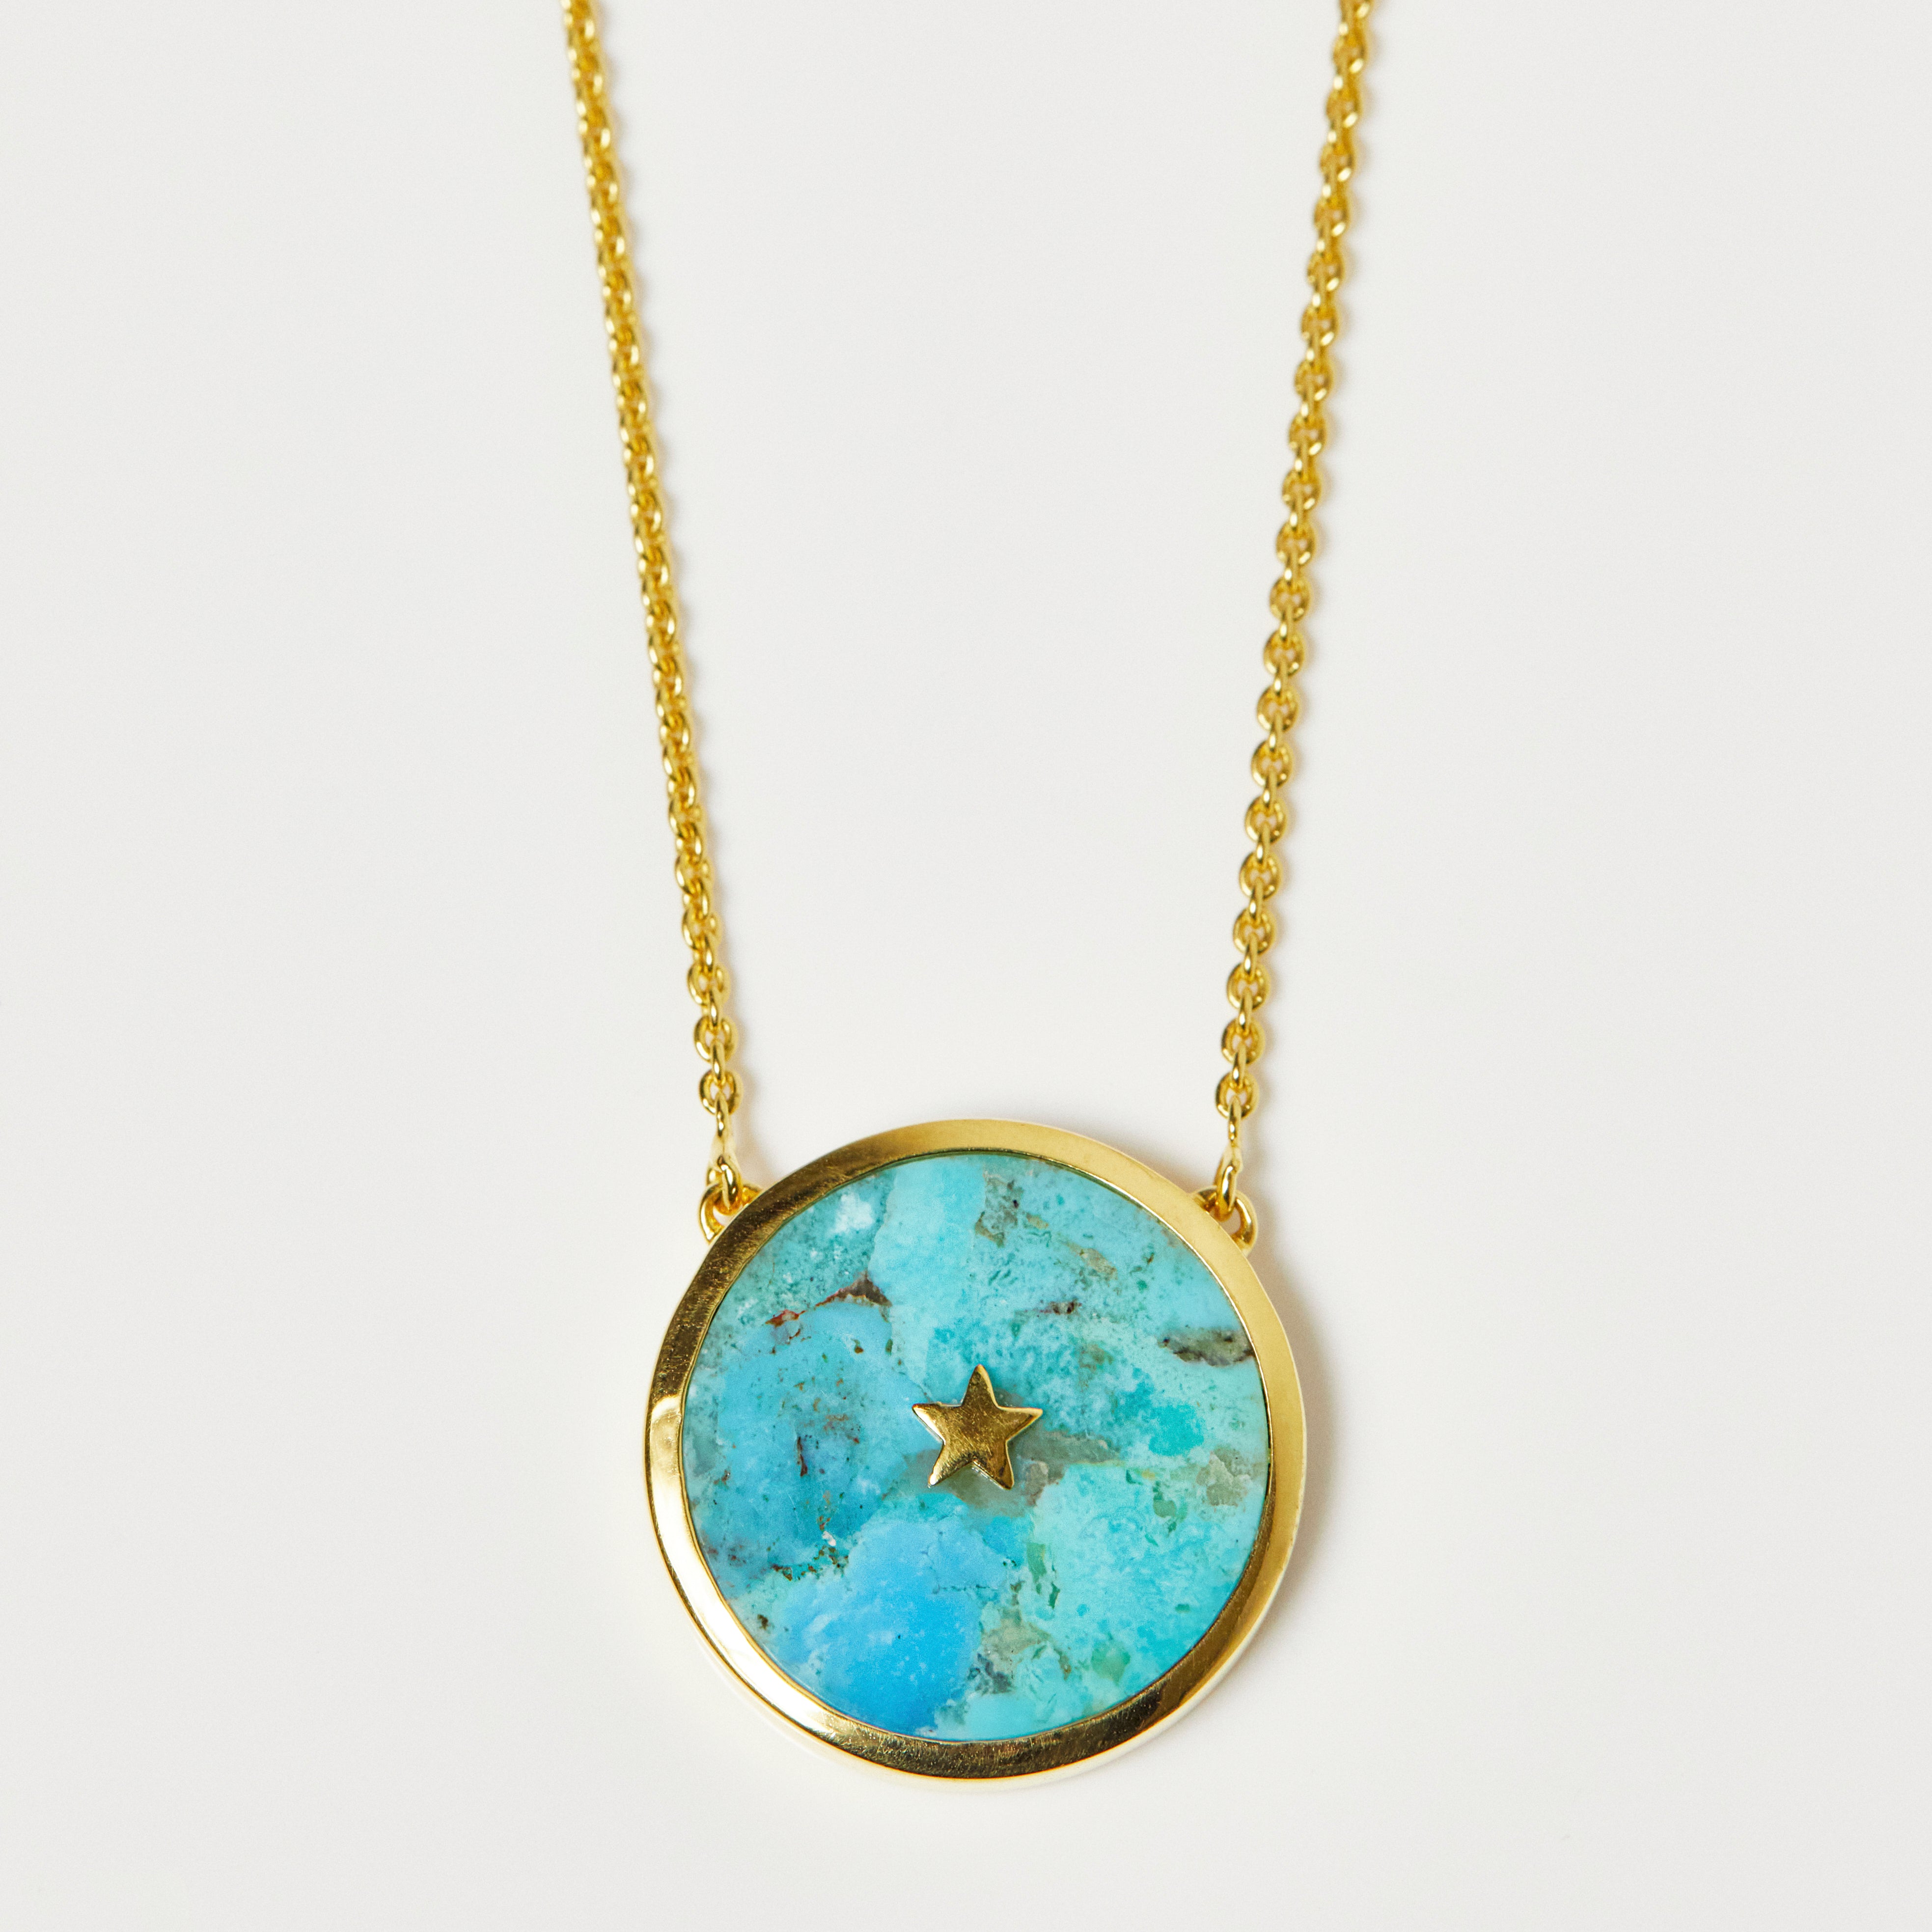 Golden Turquoise Bead Necklace with Turquoise Crystal Necklace by Peace of  Mind - hillyhorton.co.uk